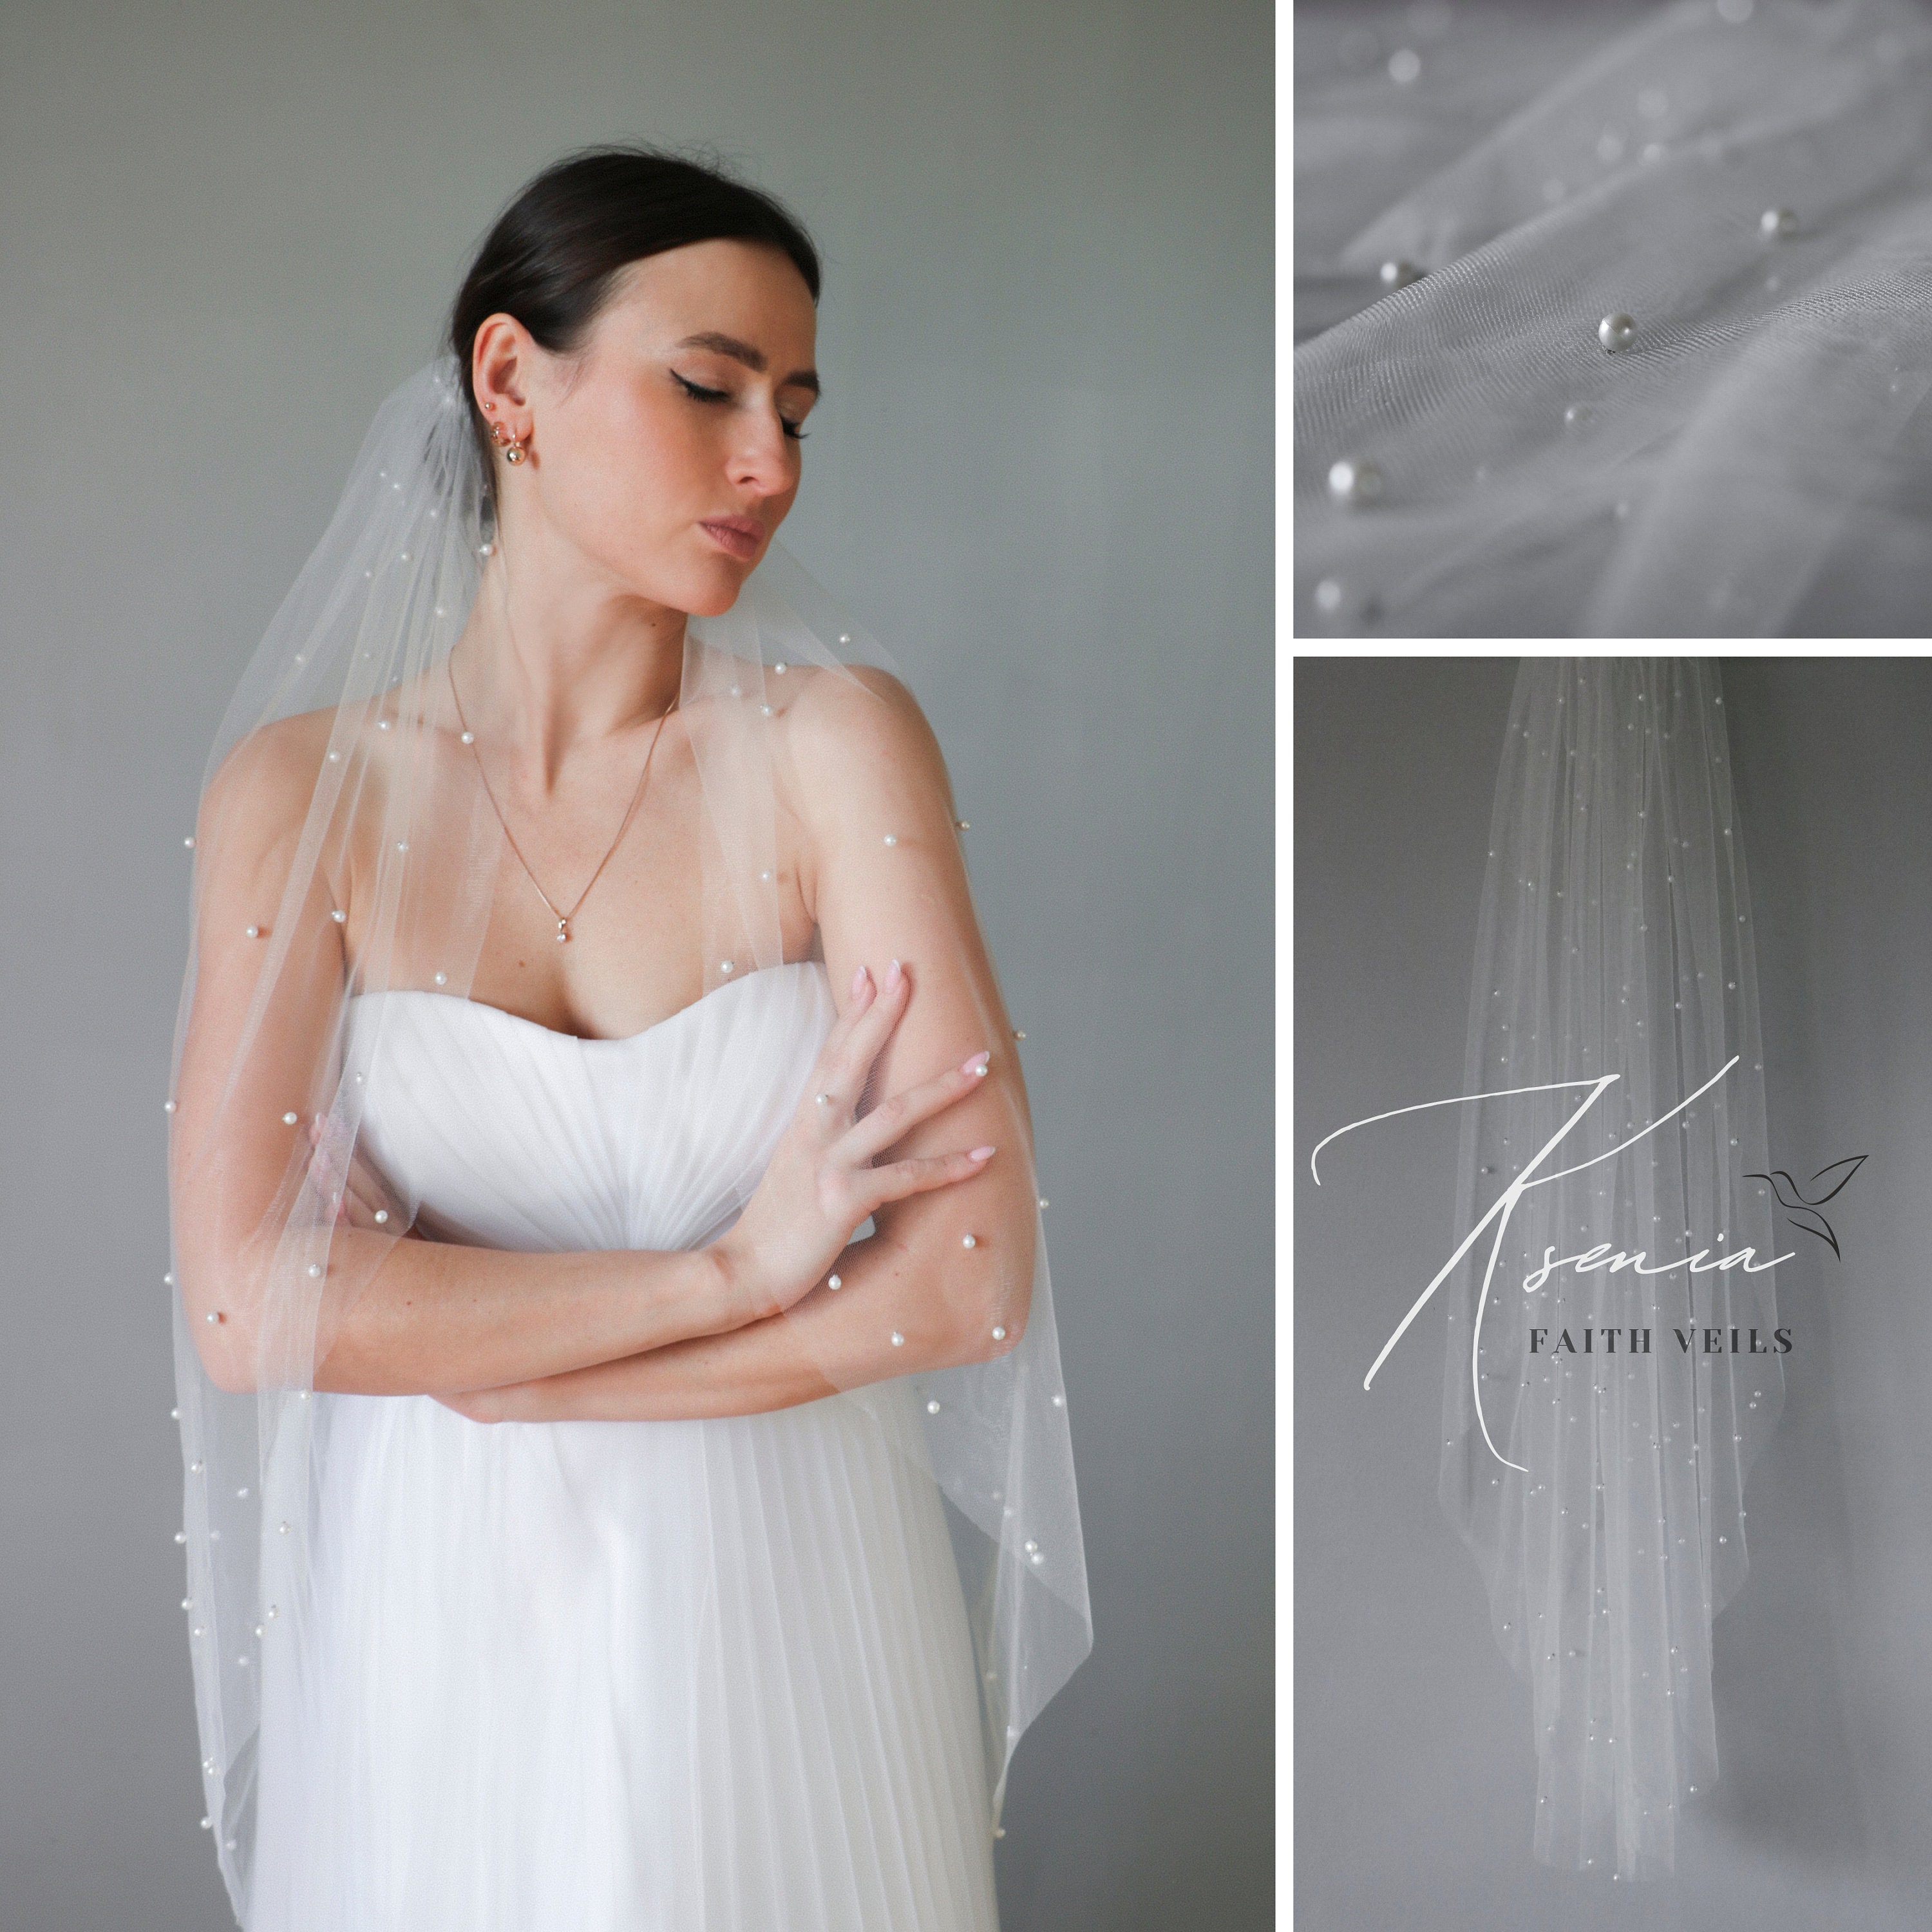  Ursumy Wedding Lace Veil Short Sparkle Waist Veils 2 Tier Soft  Tulle Bridal Veils with Comb (White) : Clothing, Shoes & Jewelry